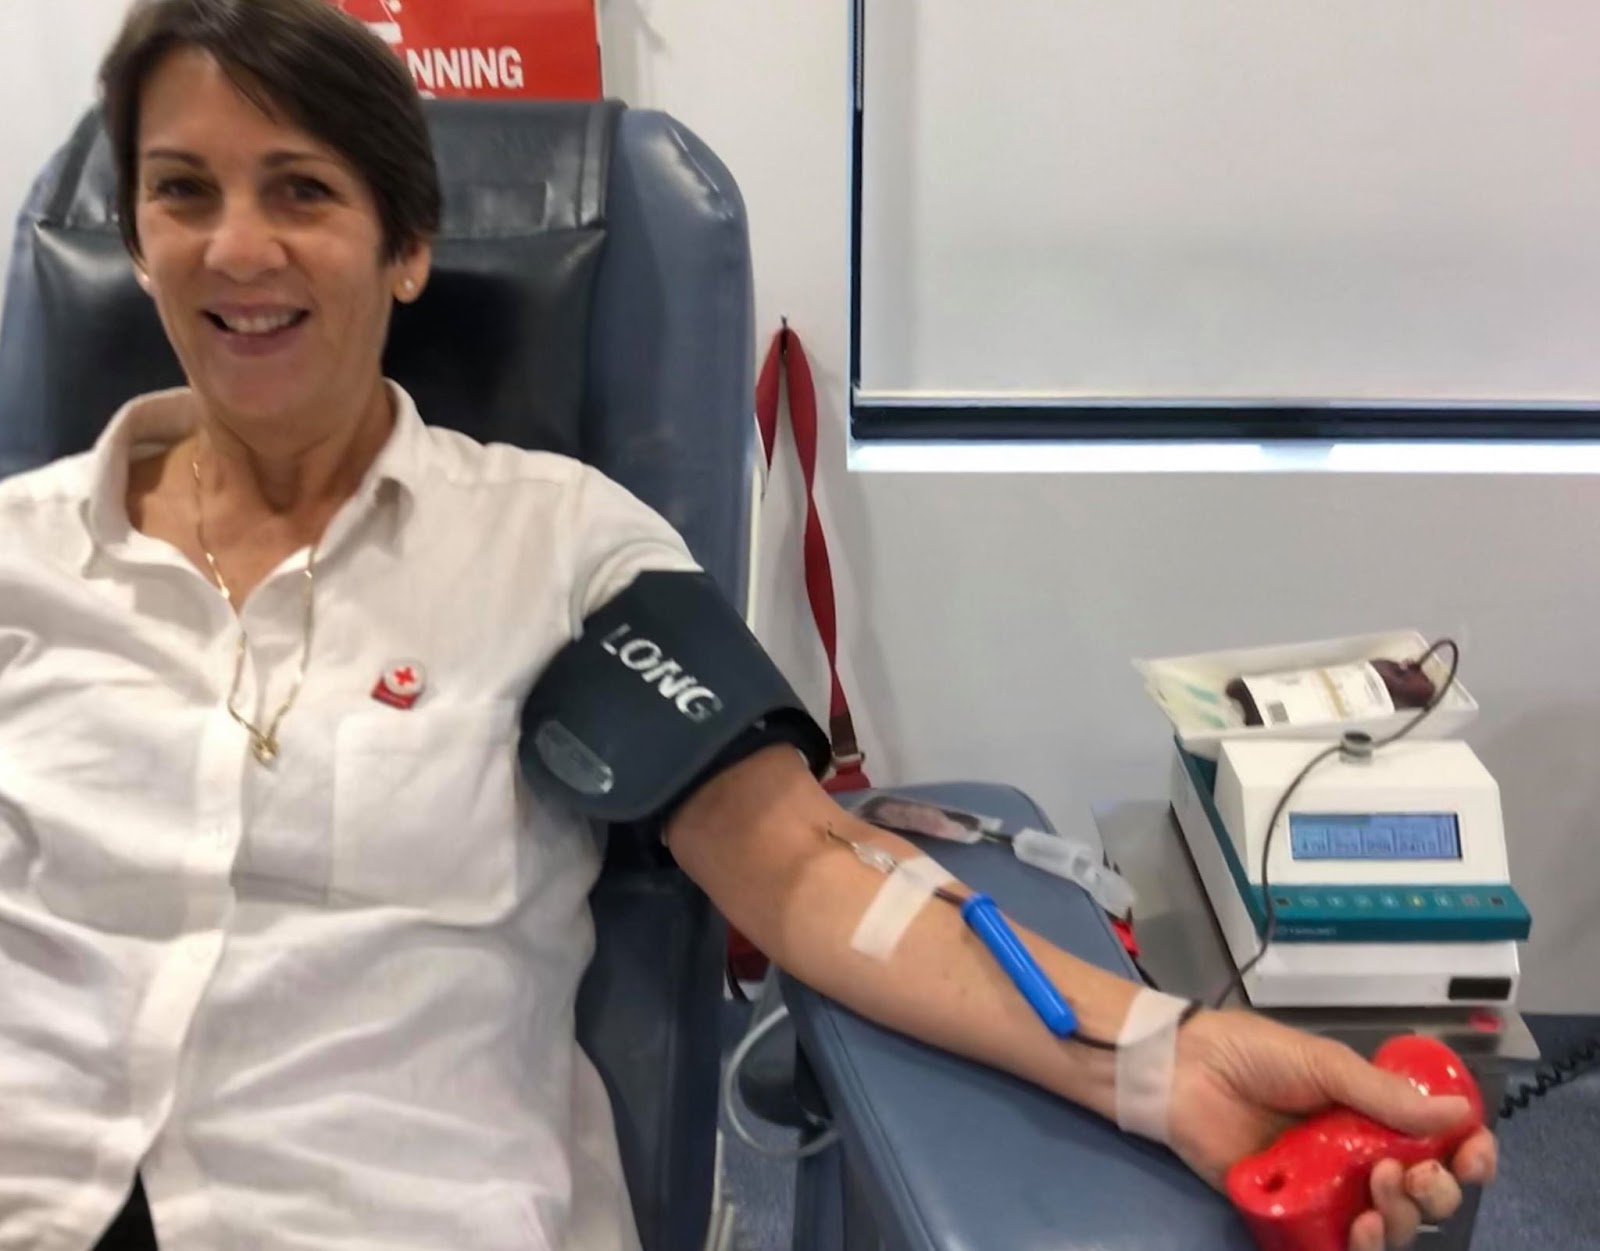 You can help people with cancer by giving blood